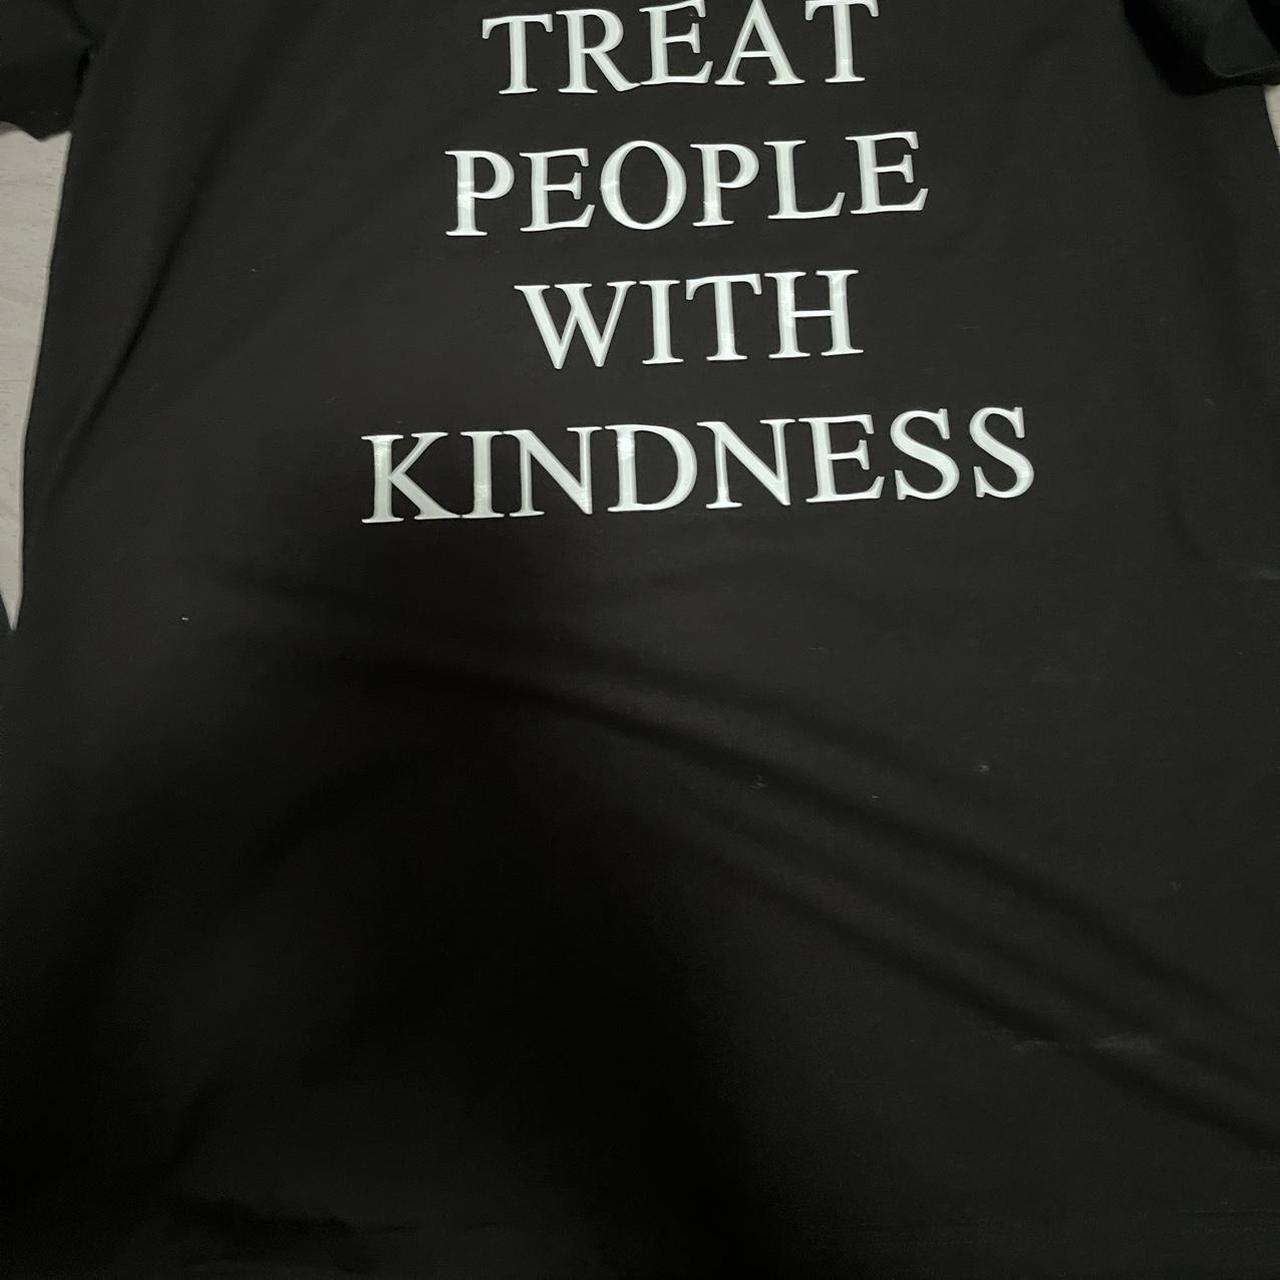 Unofficial Treat People With Kindness shirt (runs a